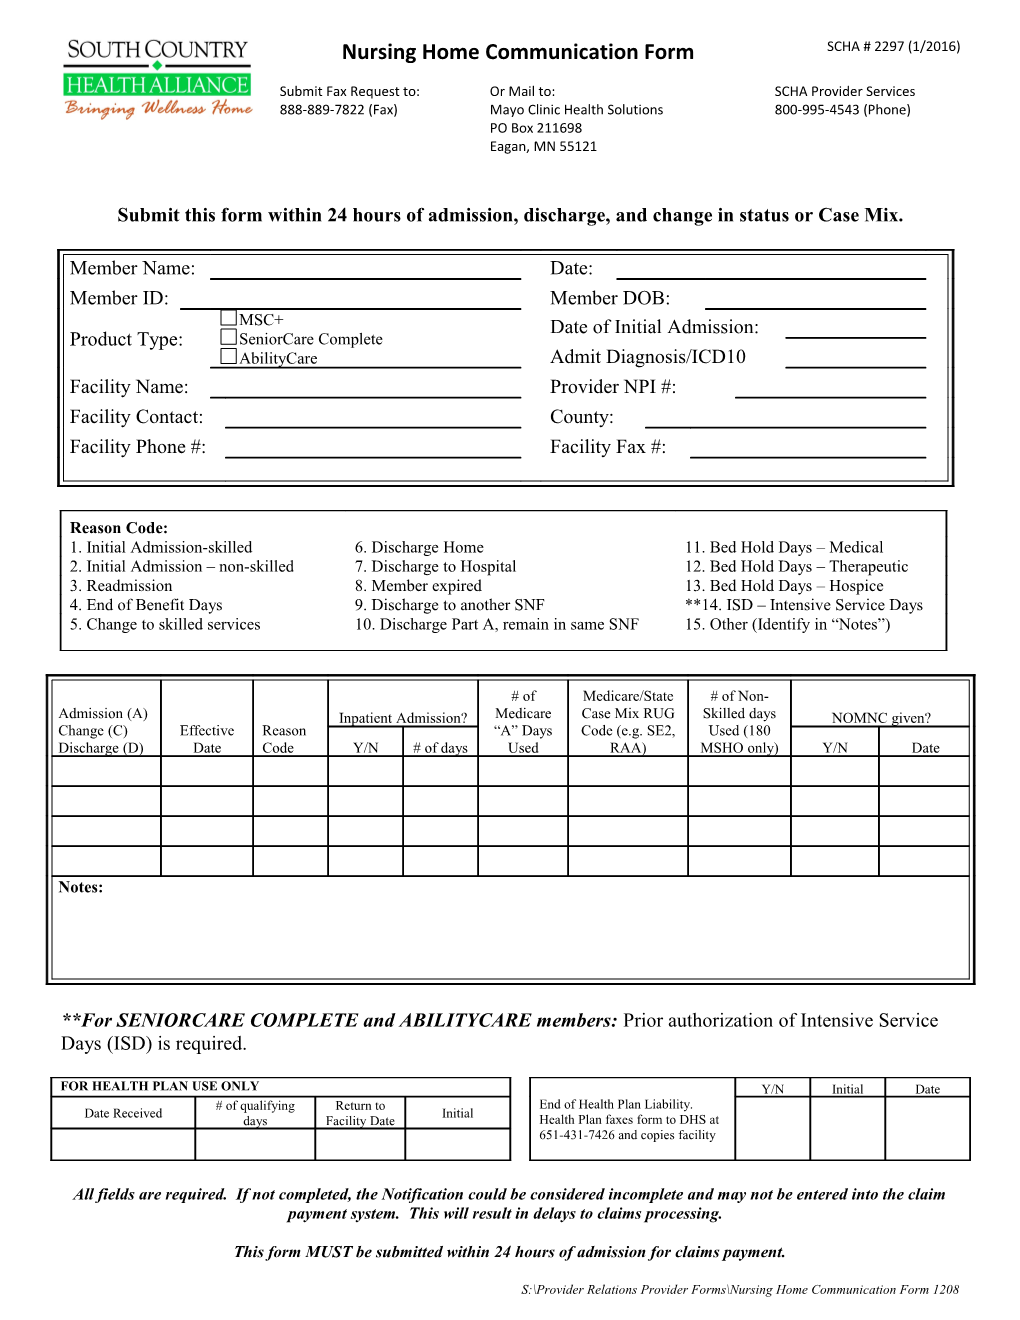 Submit This Form Within 24 Hours of Admission, Discharge, and Change in Status Or Case Mix